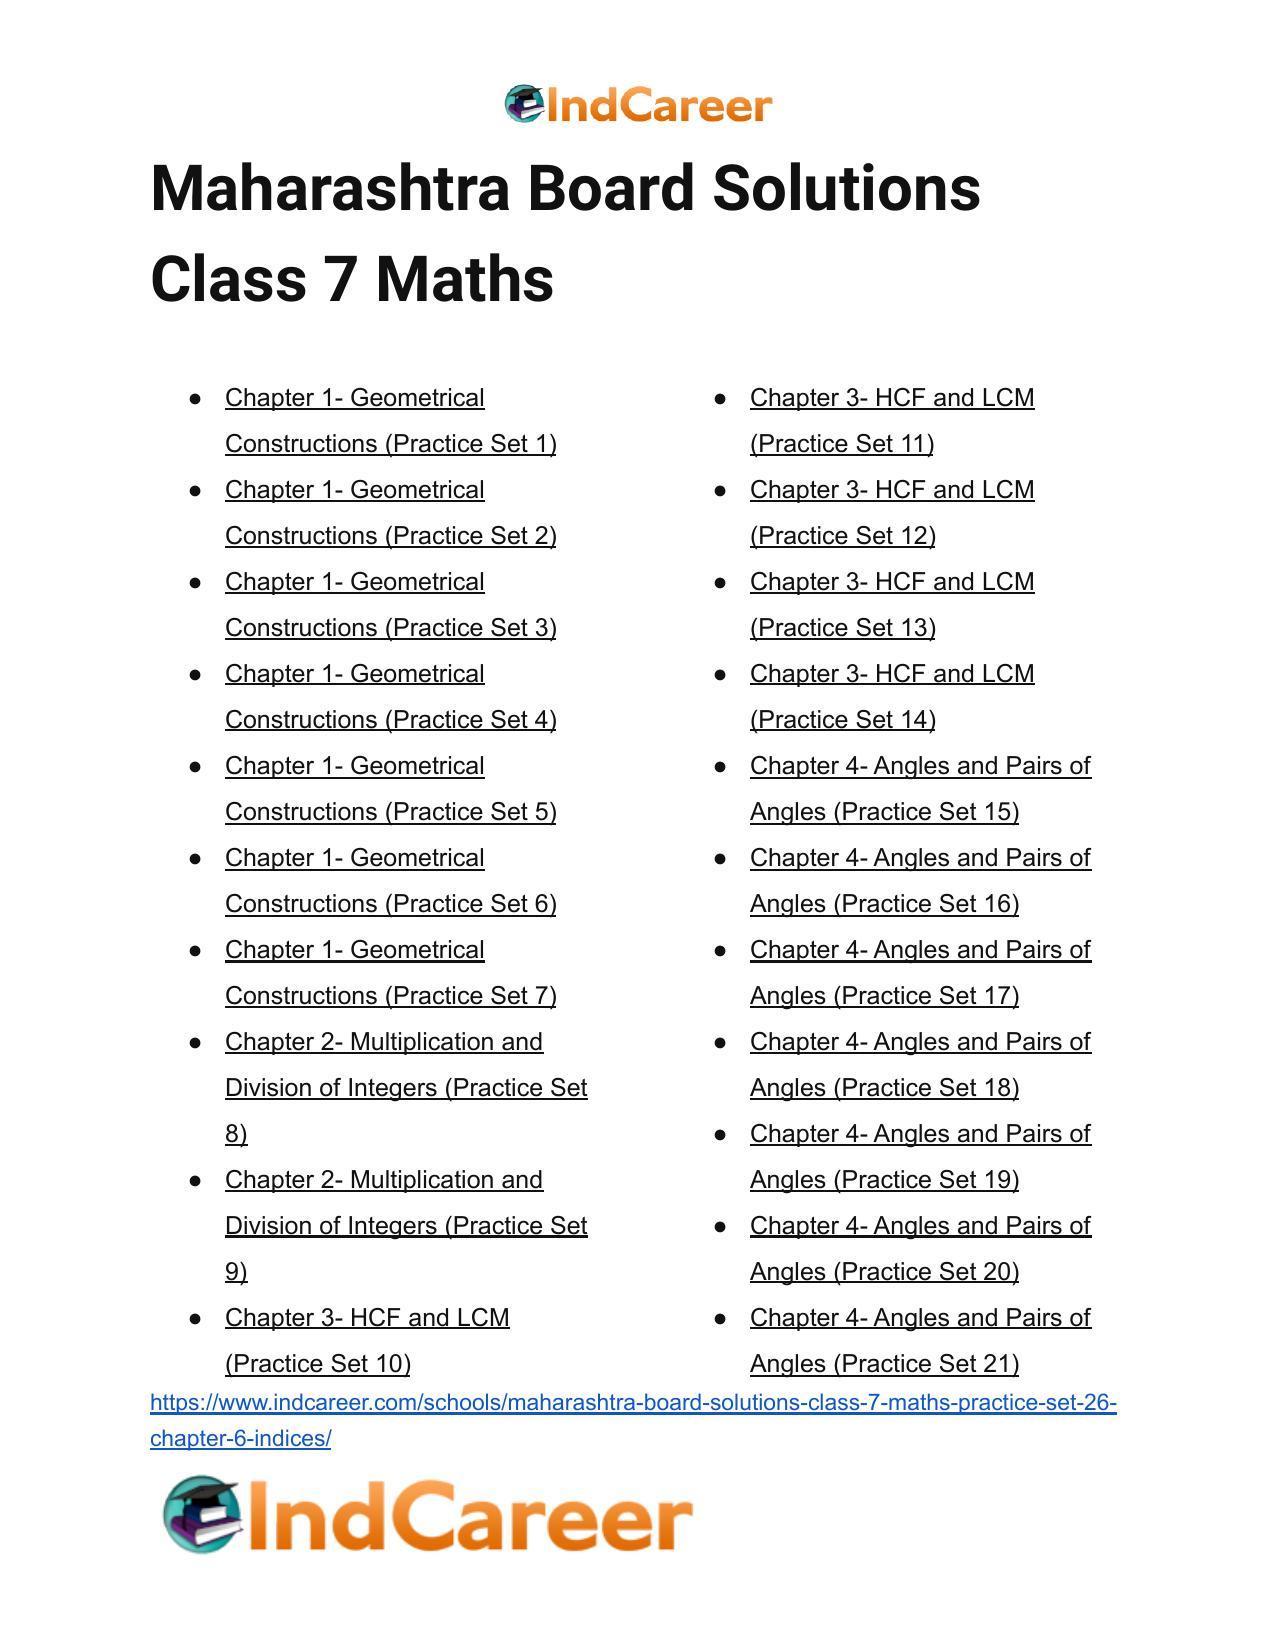 Maharashtra Board Solutions Class 7-Maths (Practice Set 26): Chapter 6- Indices - Page 7